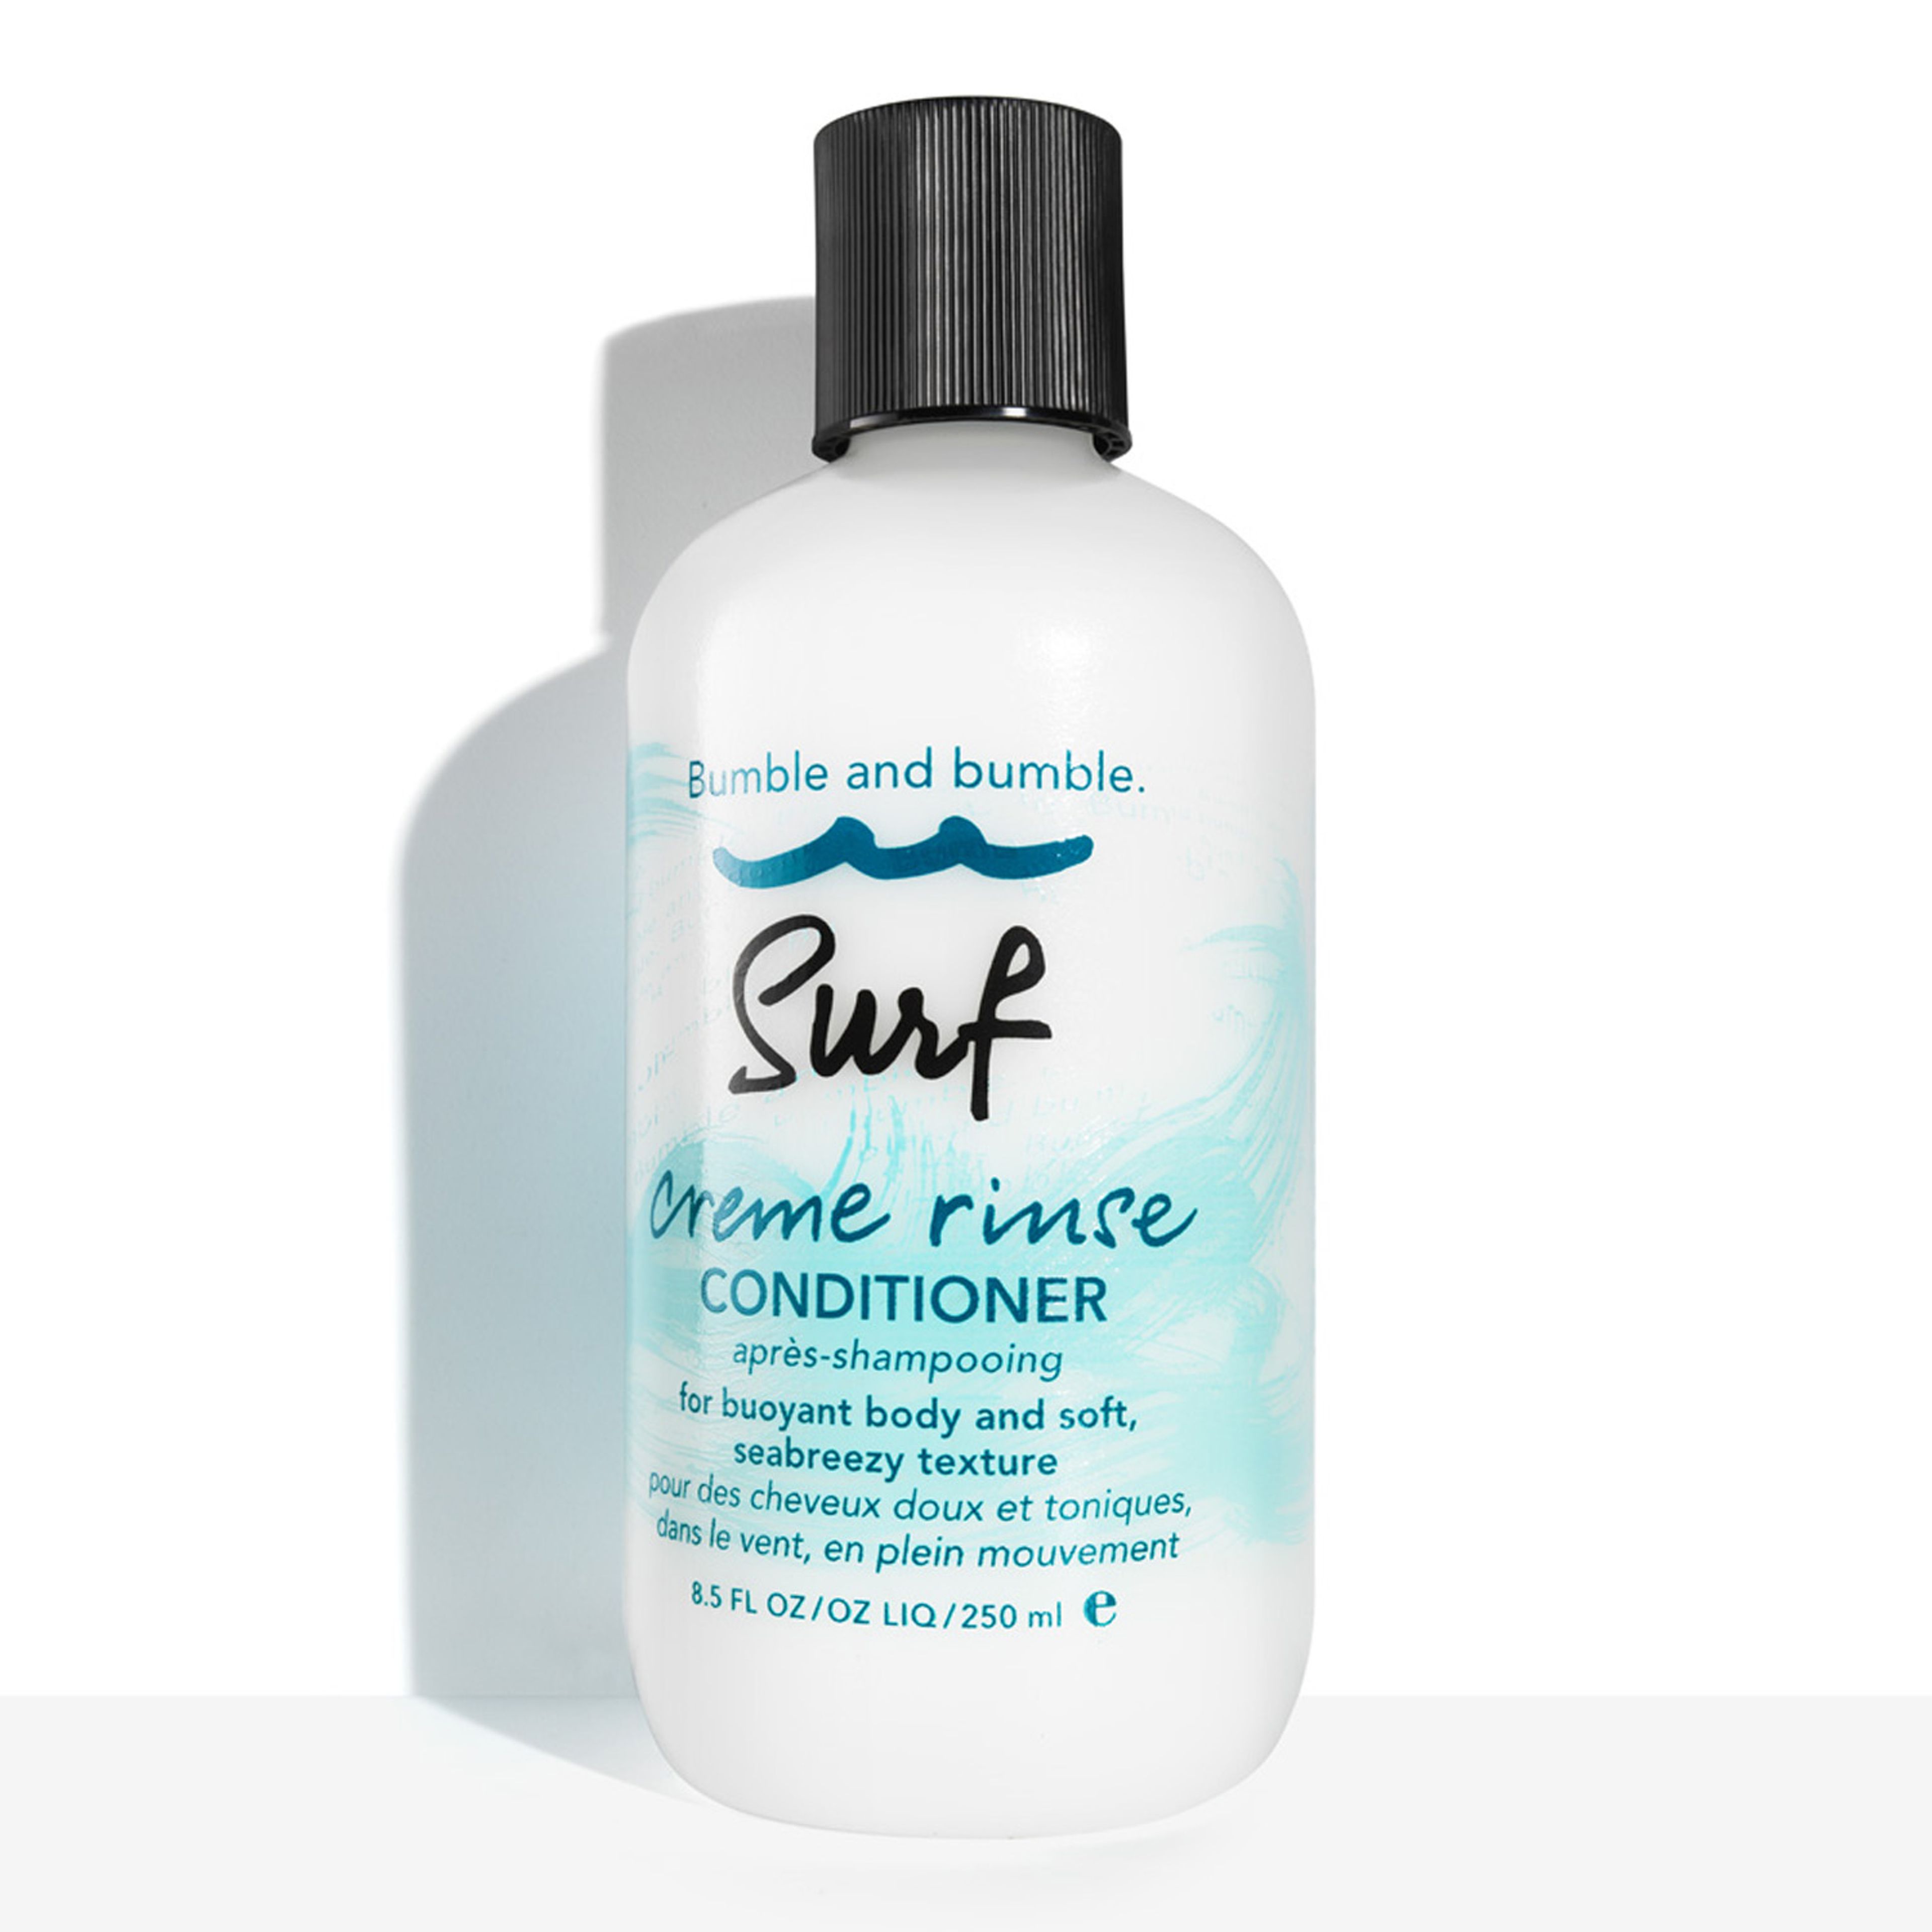 Bumble and bumble Surf Creme Rinse Conditioner 1